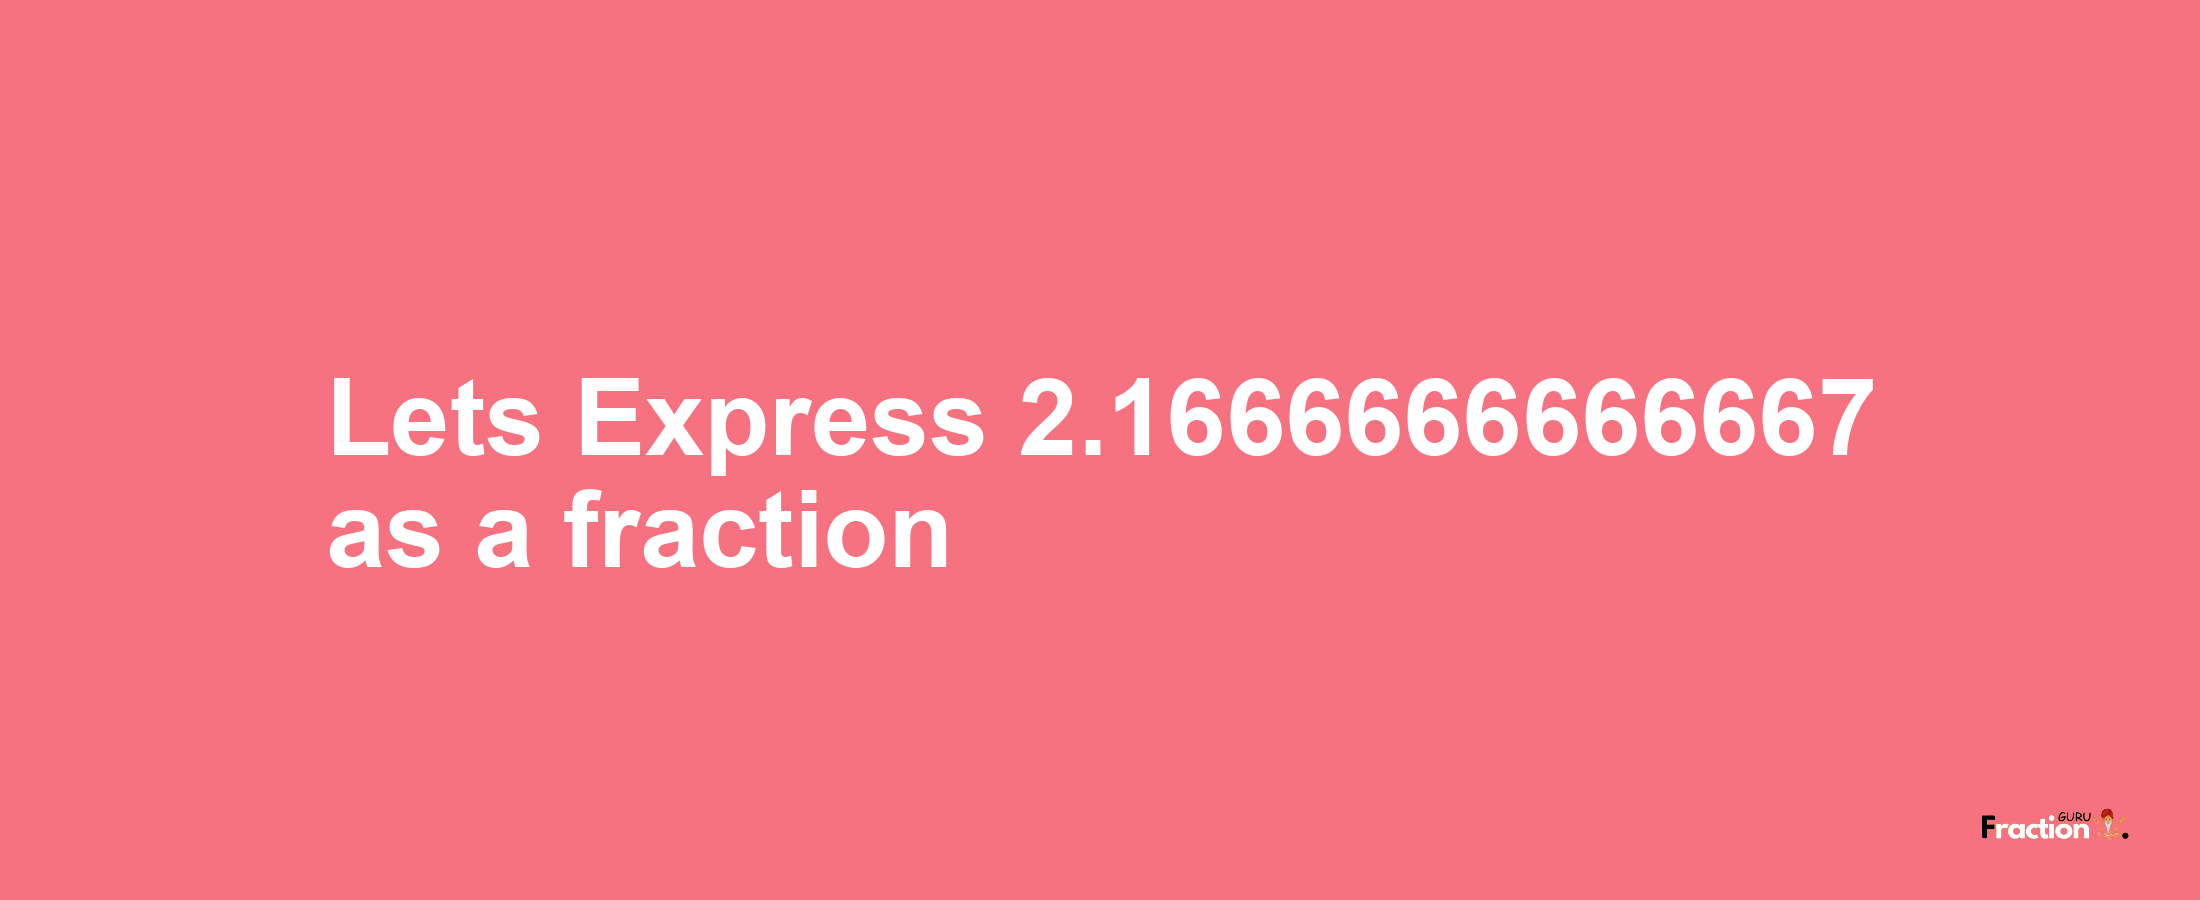 Lets Express 2.1666666666667 as afraction